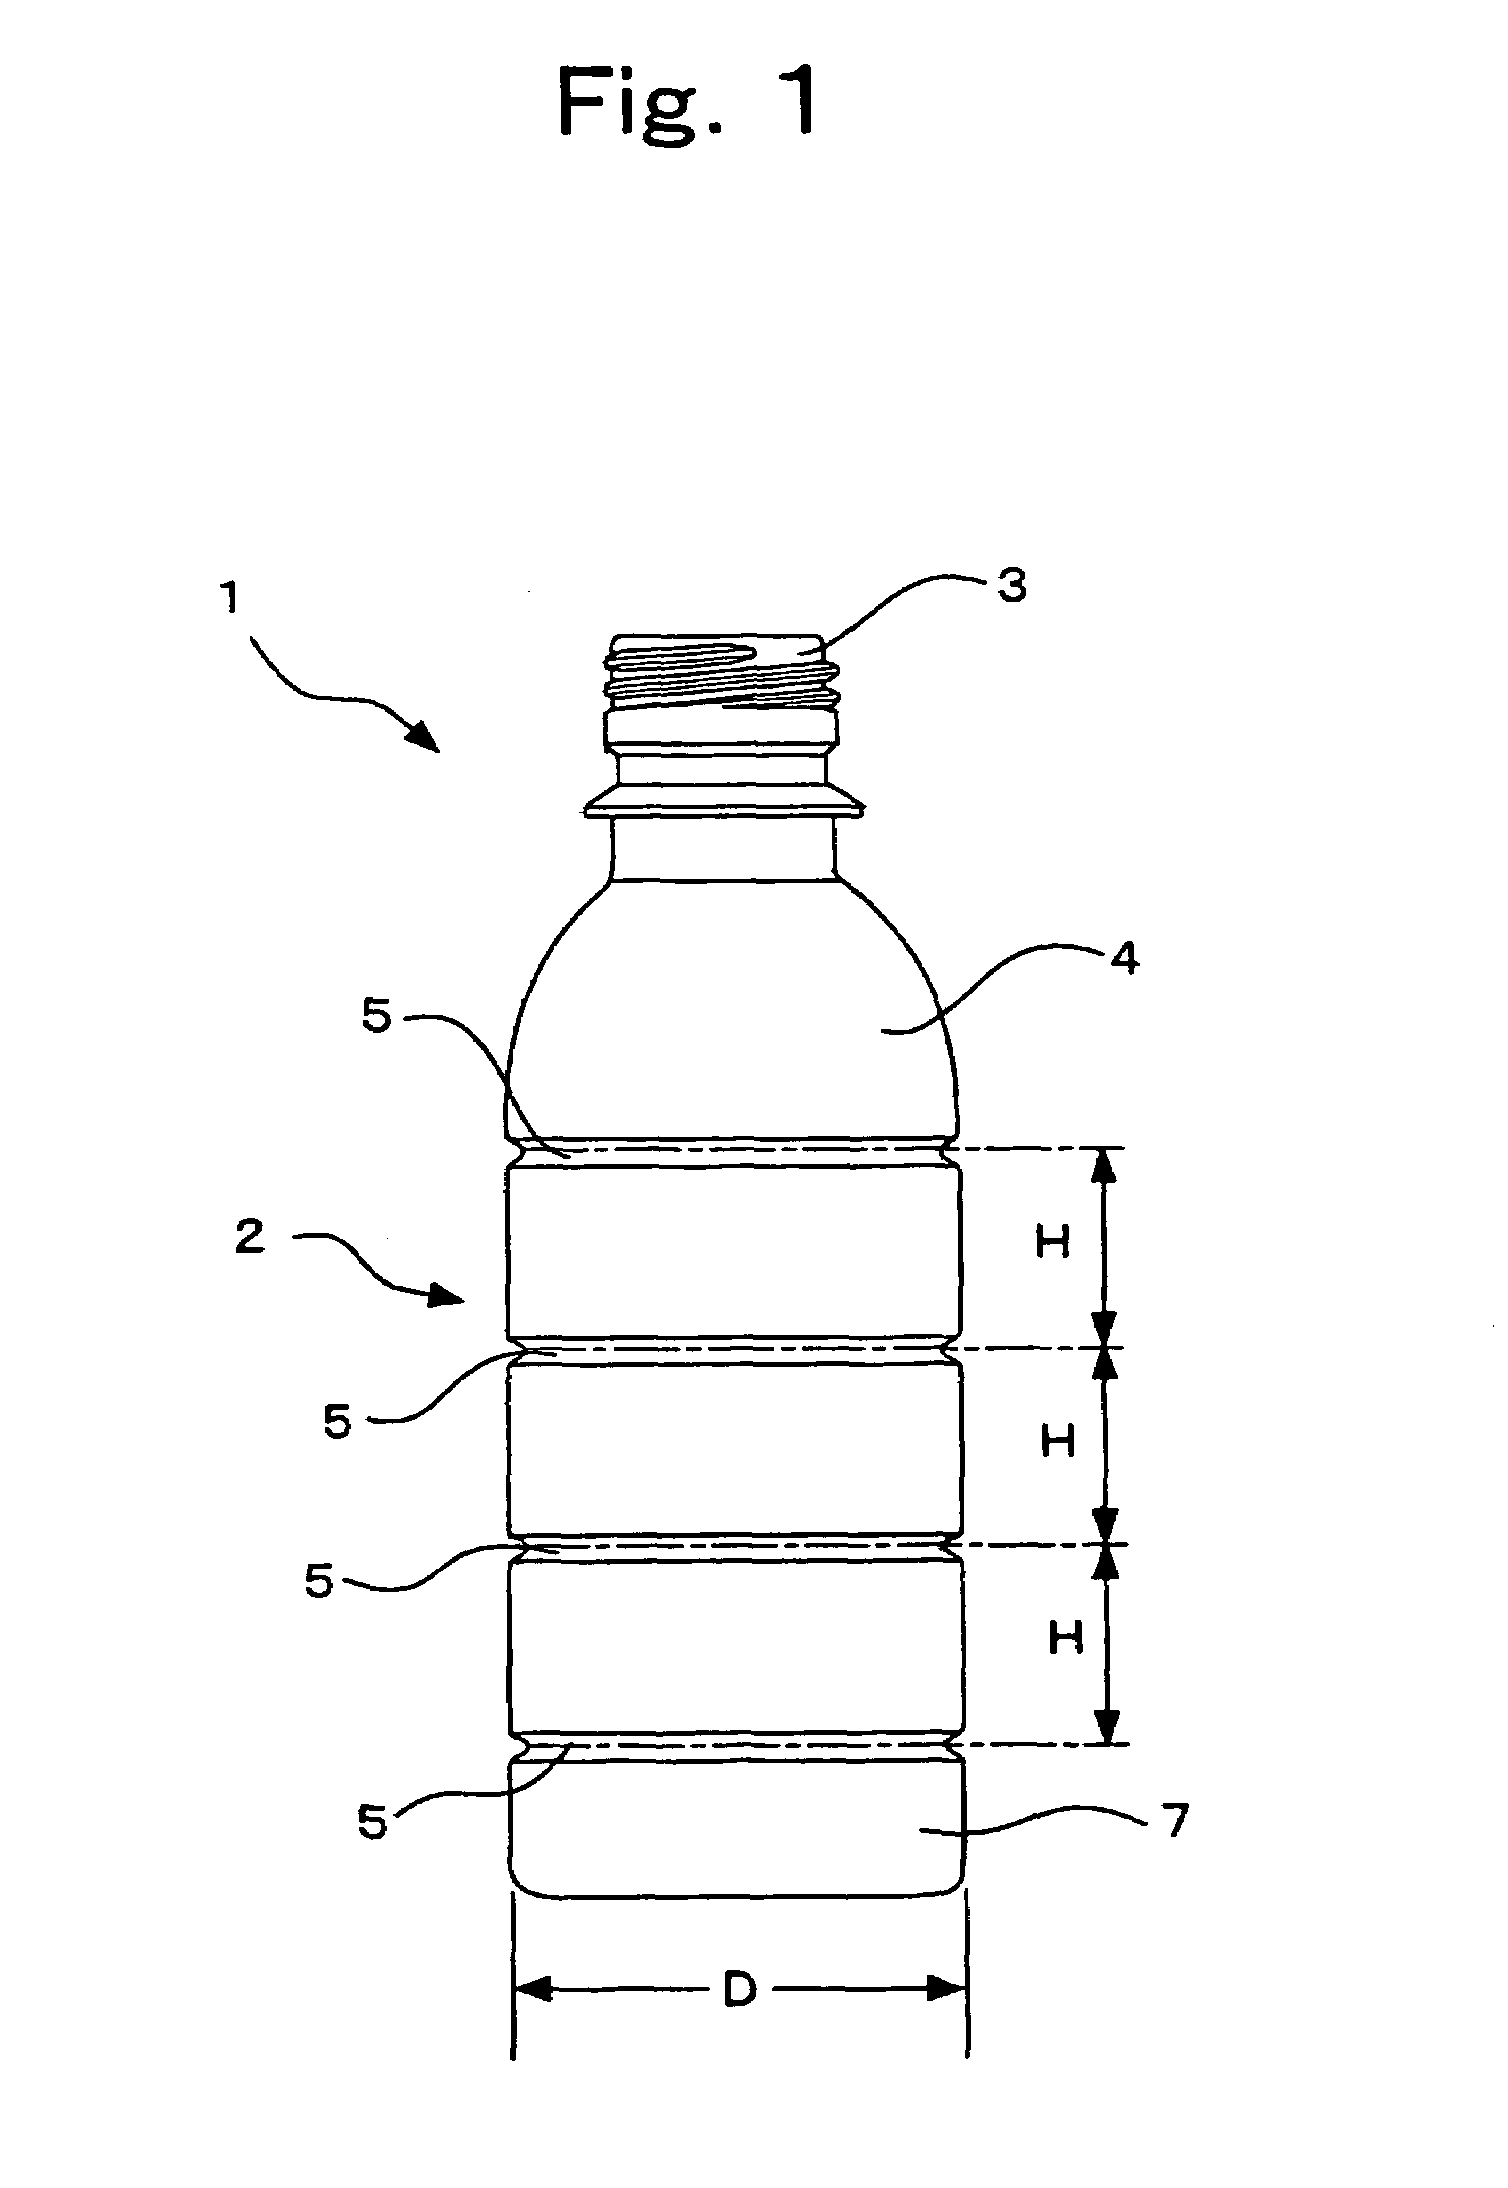 Synthetic resin bottle with circumferential ribs for increased surface rigidity